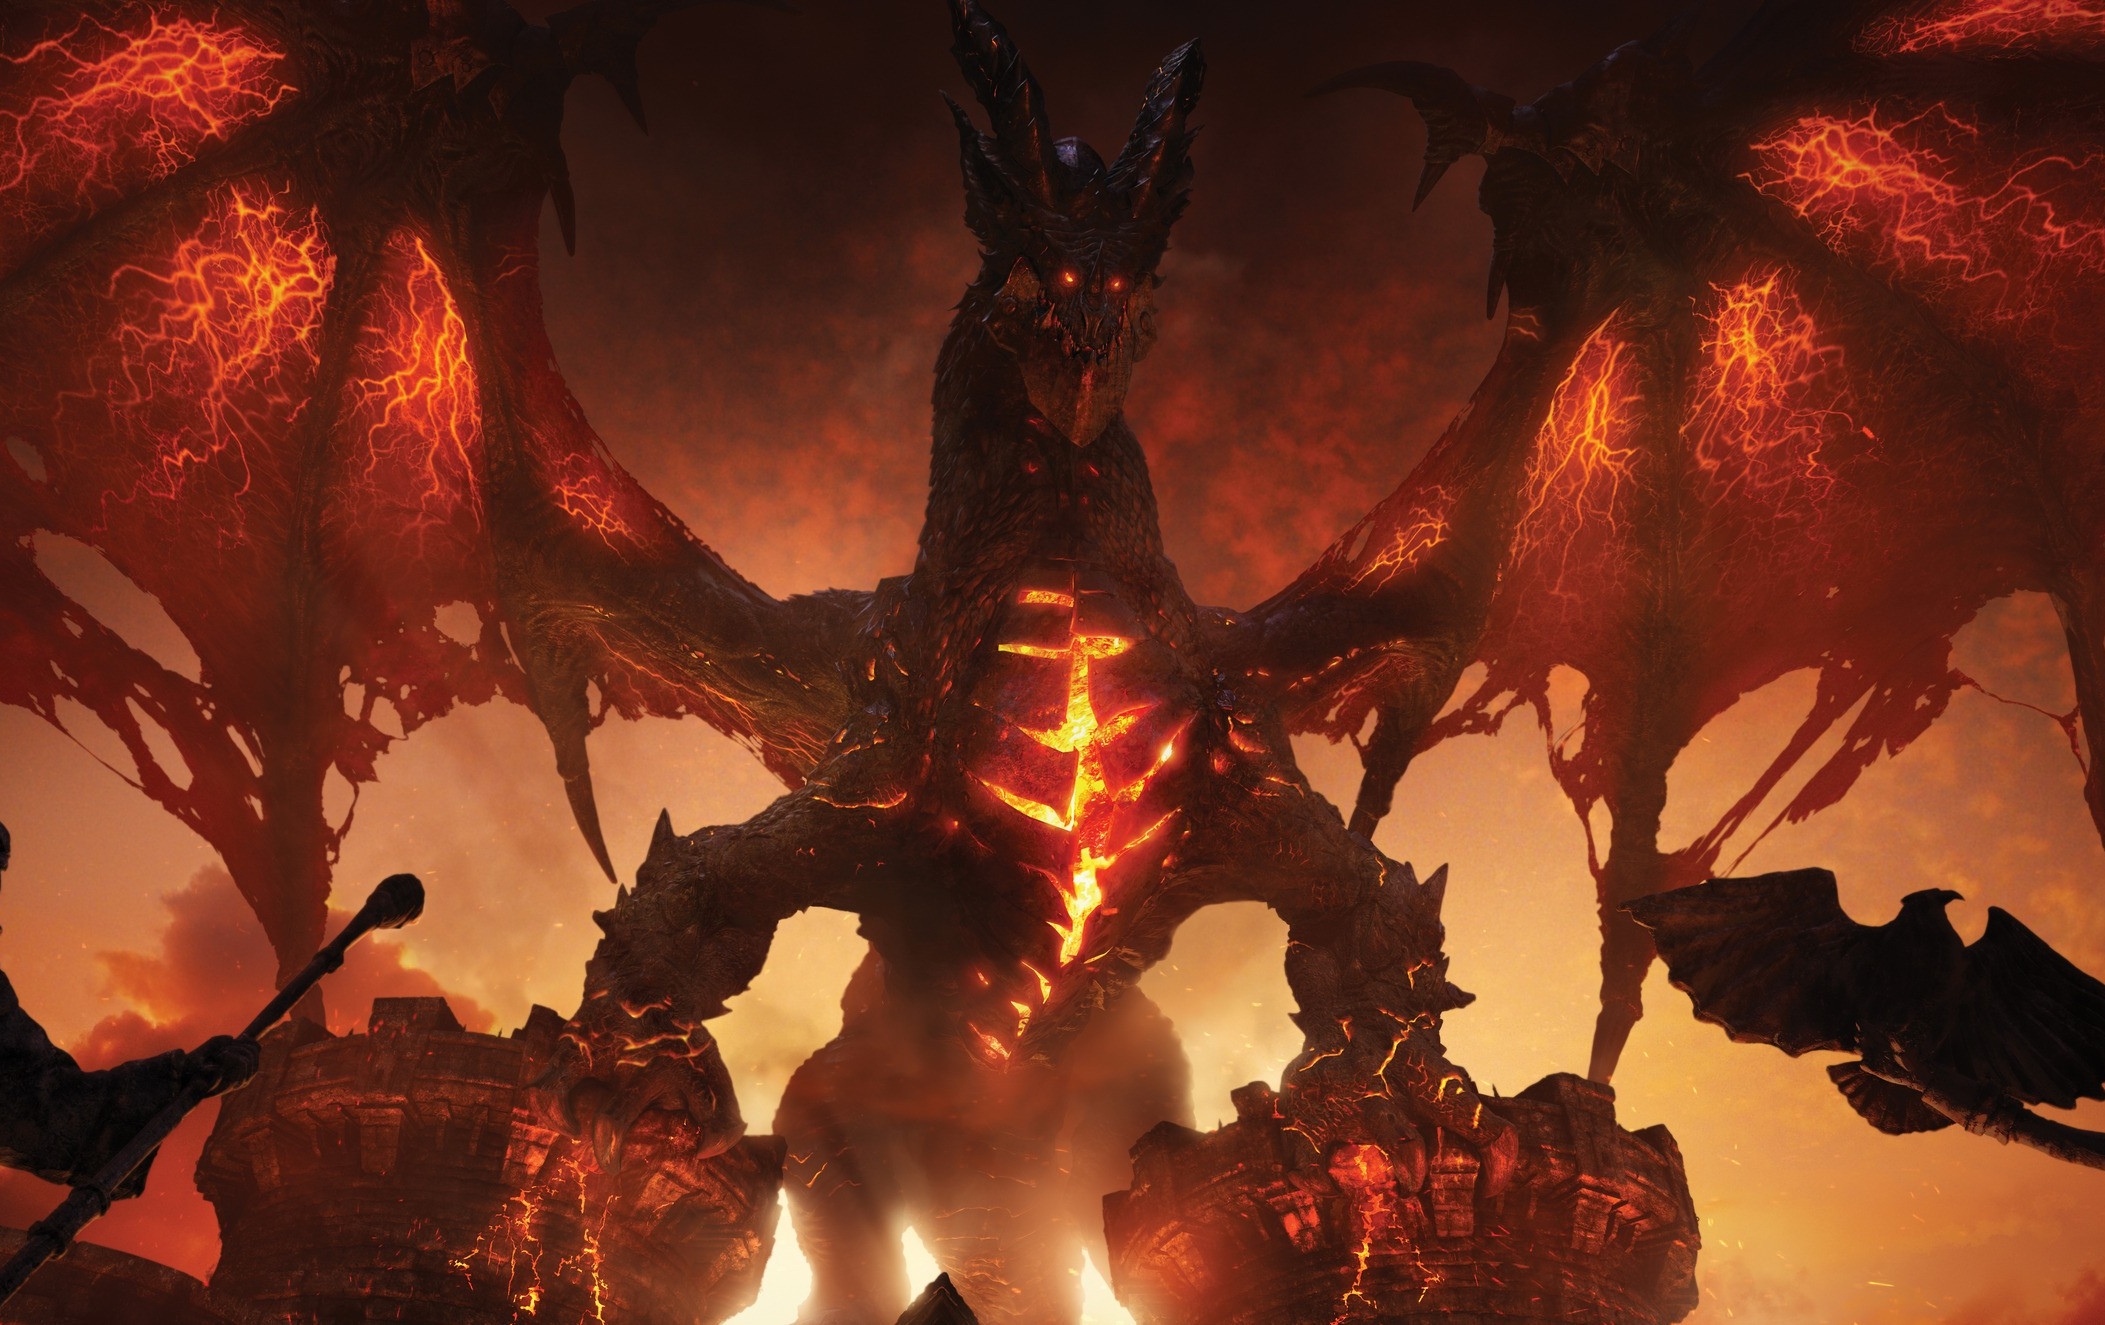 Deathwing, a fearsome dragon from the game World of Warcraft, towering over the scenic Chambers of the Eternal.